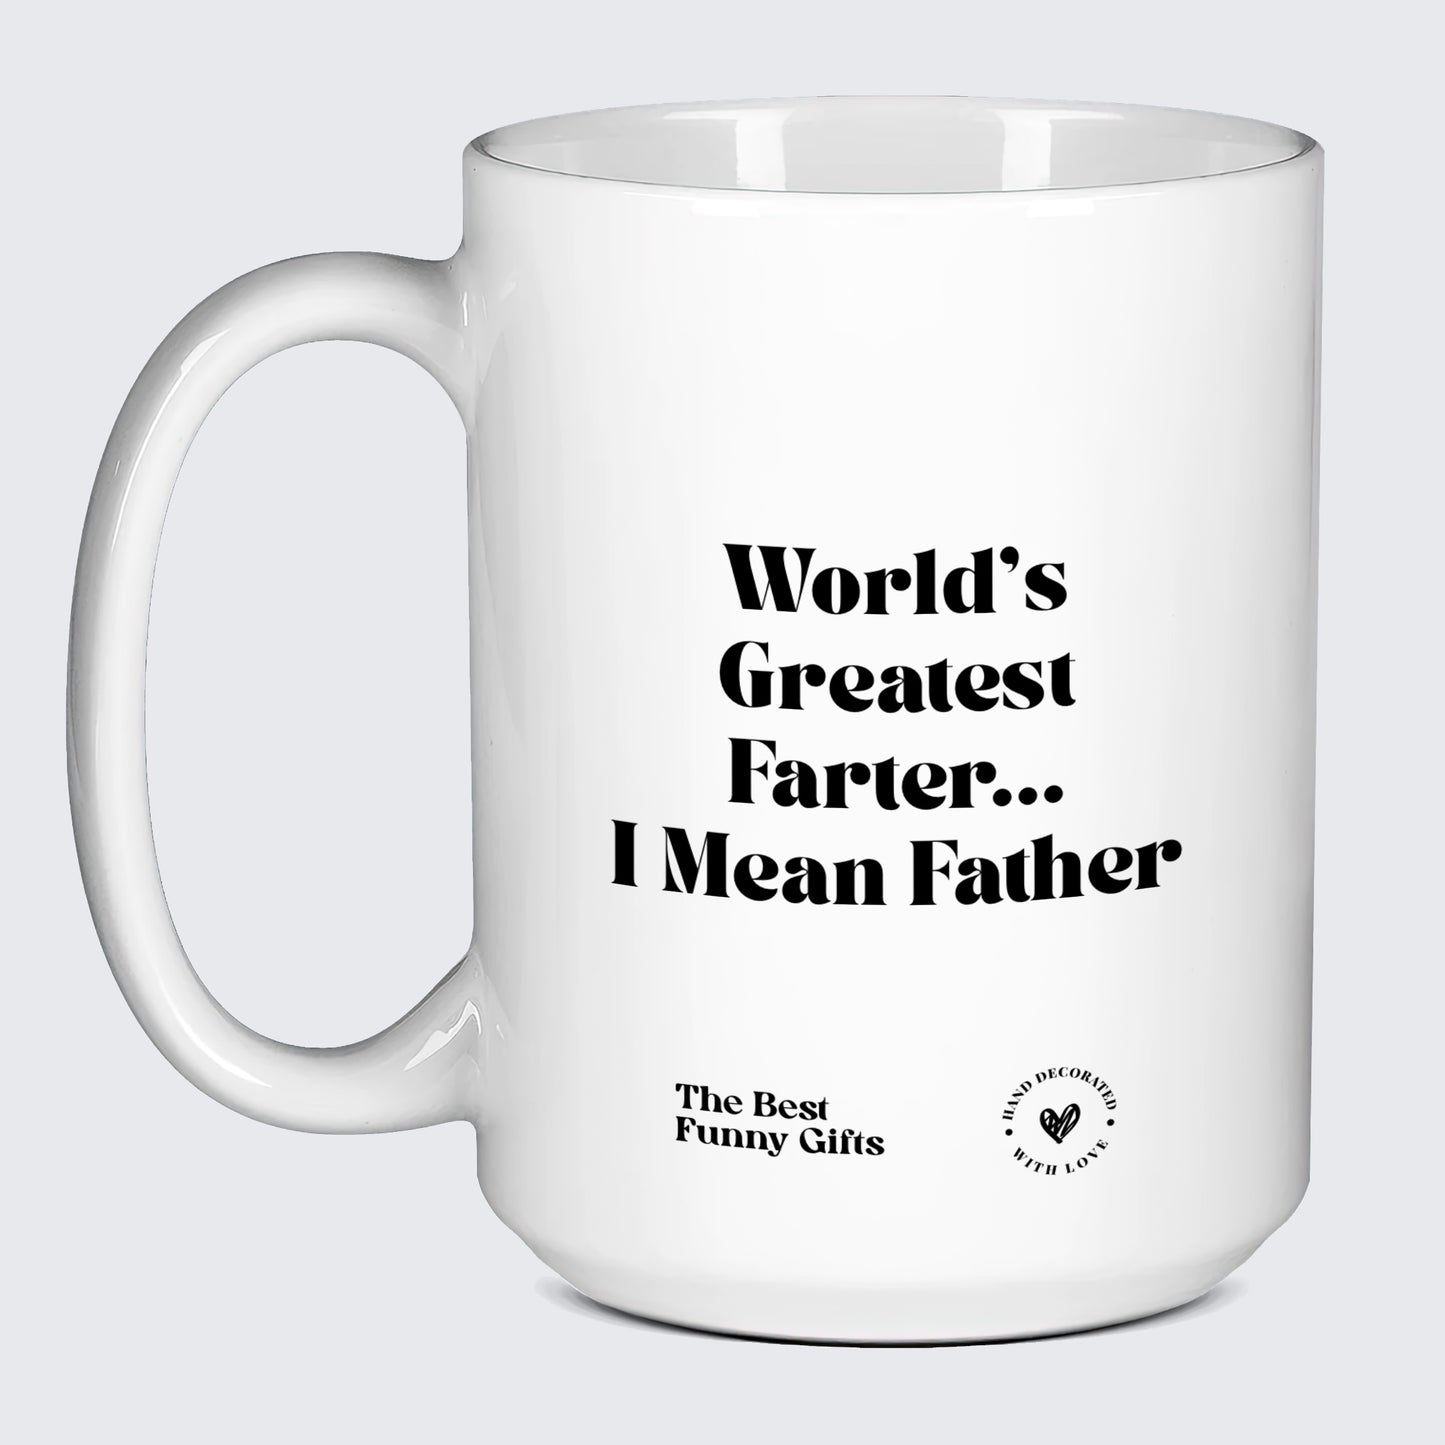 Funny Gift for Dad World's Greatest Farter... I Mean Father - The Best Funny Gifts